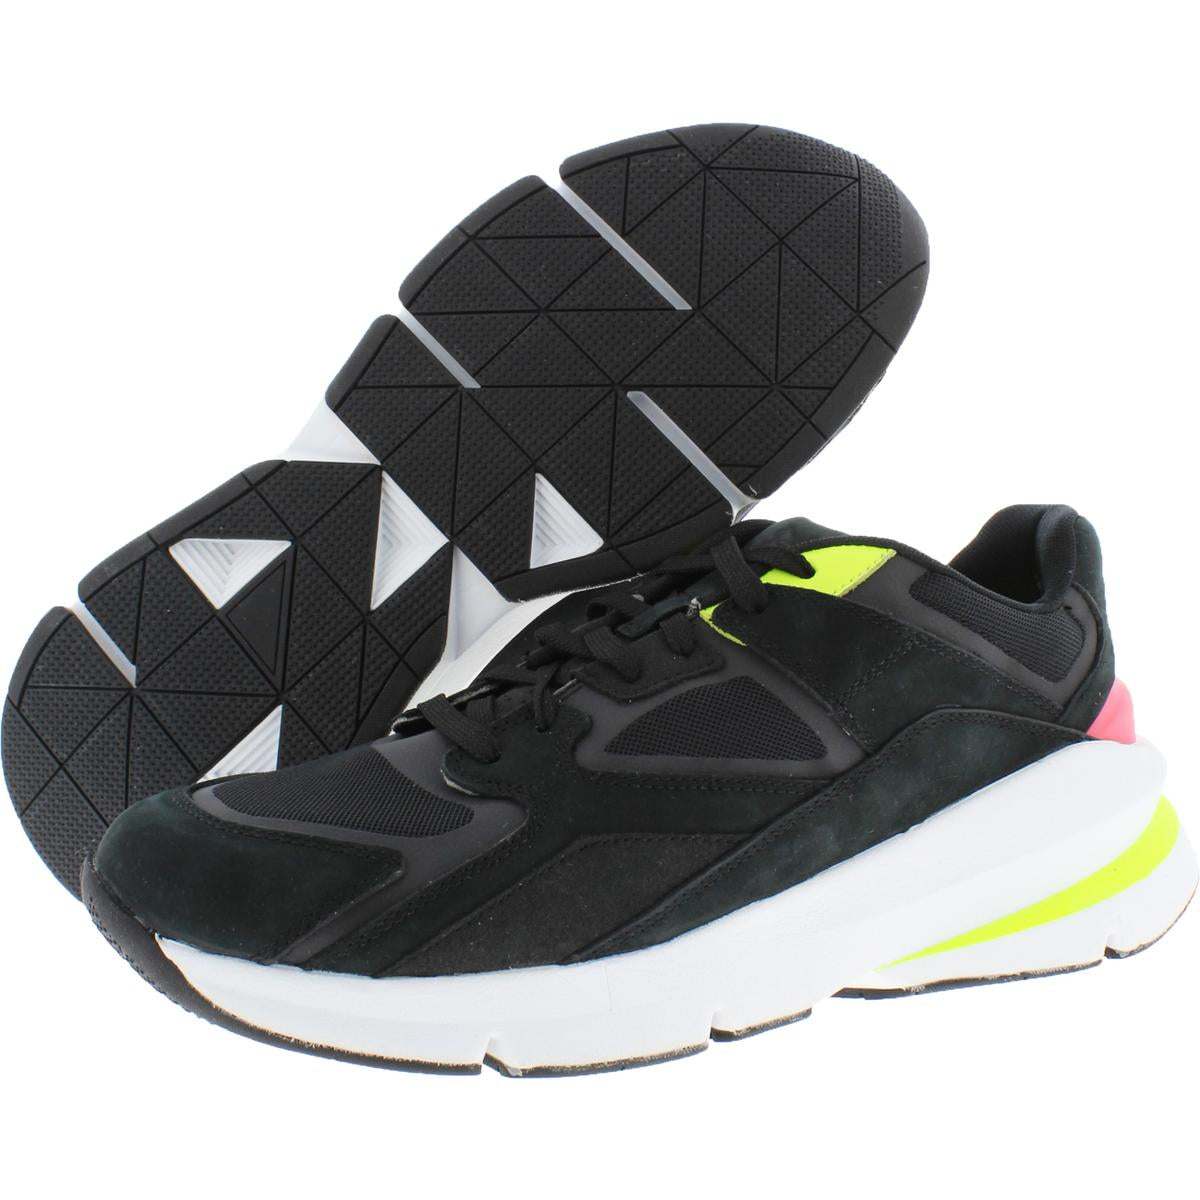 Under Armour Mens Forge 96 OG Performance Workout Running Shoes